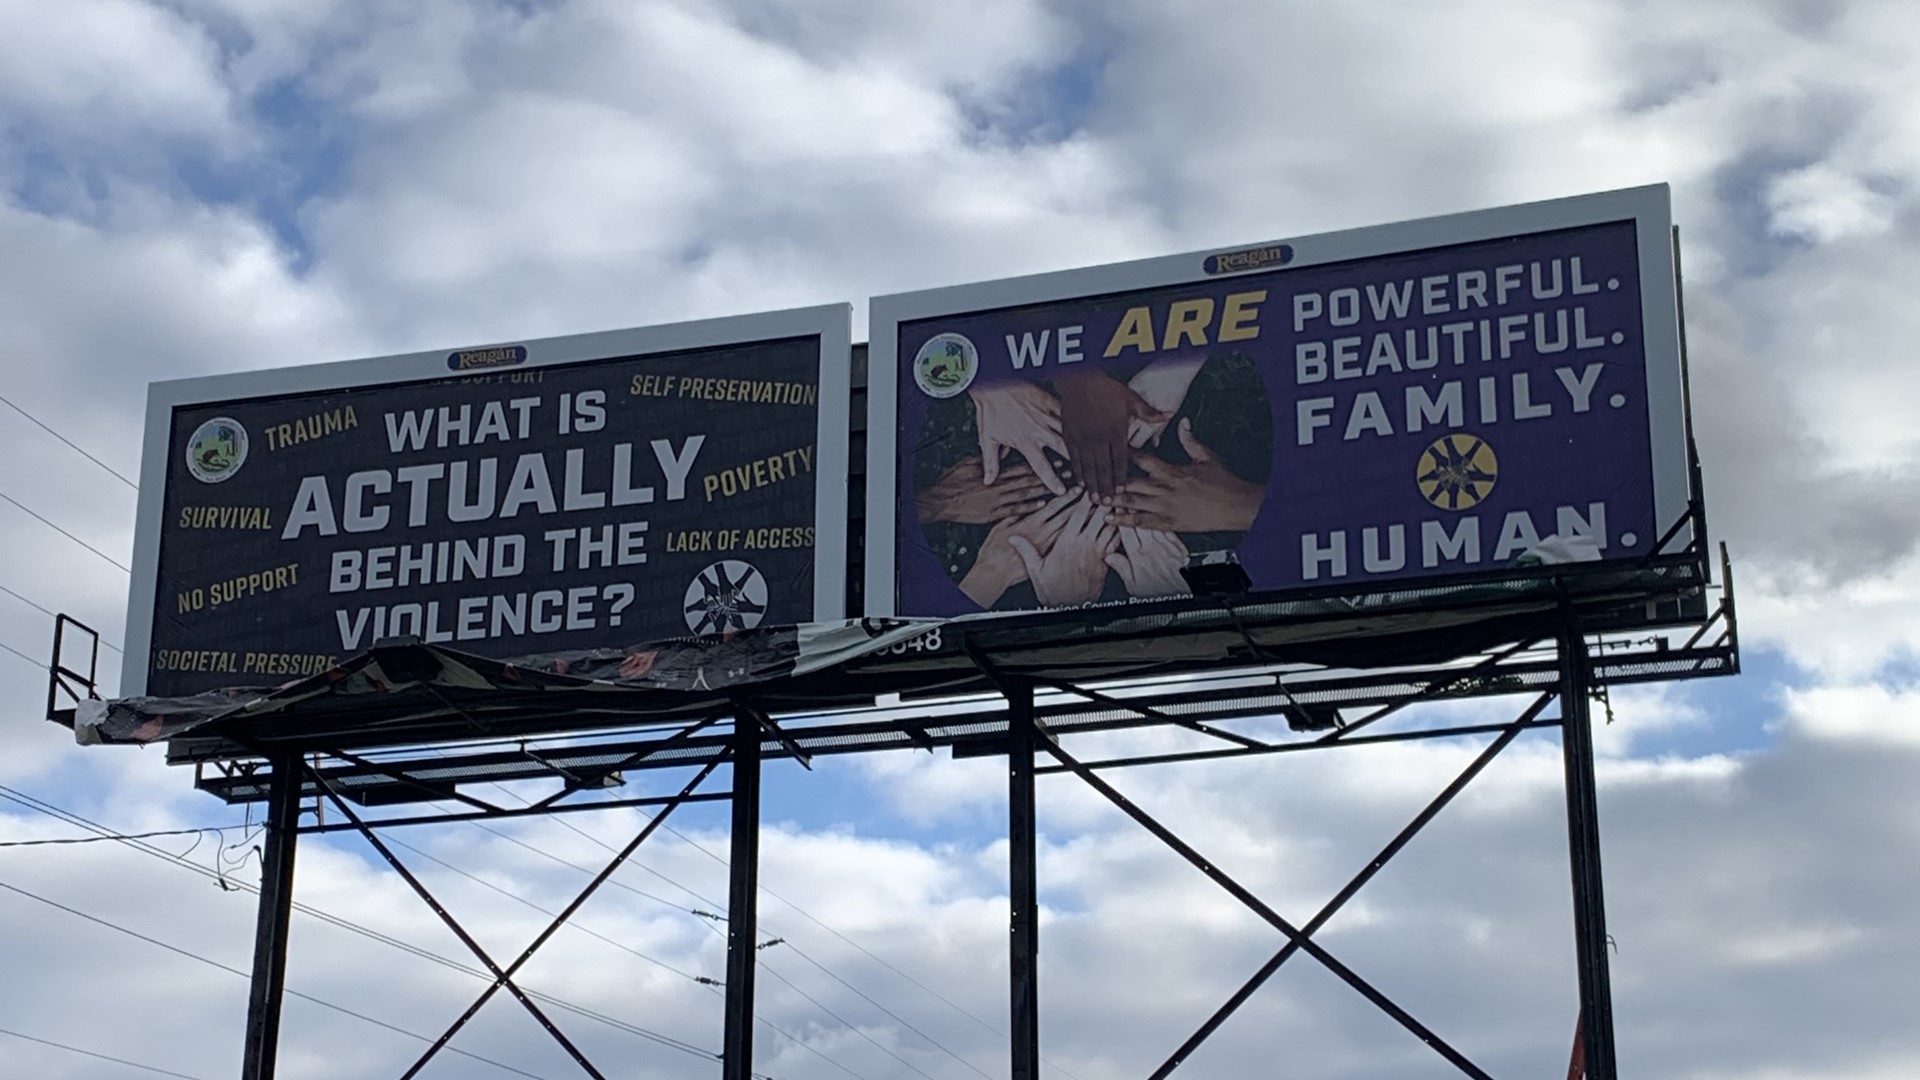 There will be 25 billboards, designed by youth, going up around Indianapolis promoting two messages: the reason behind violence and unity.